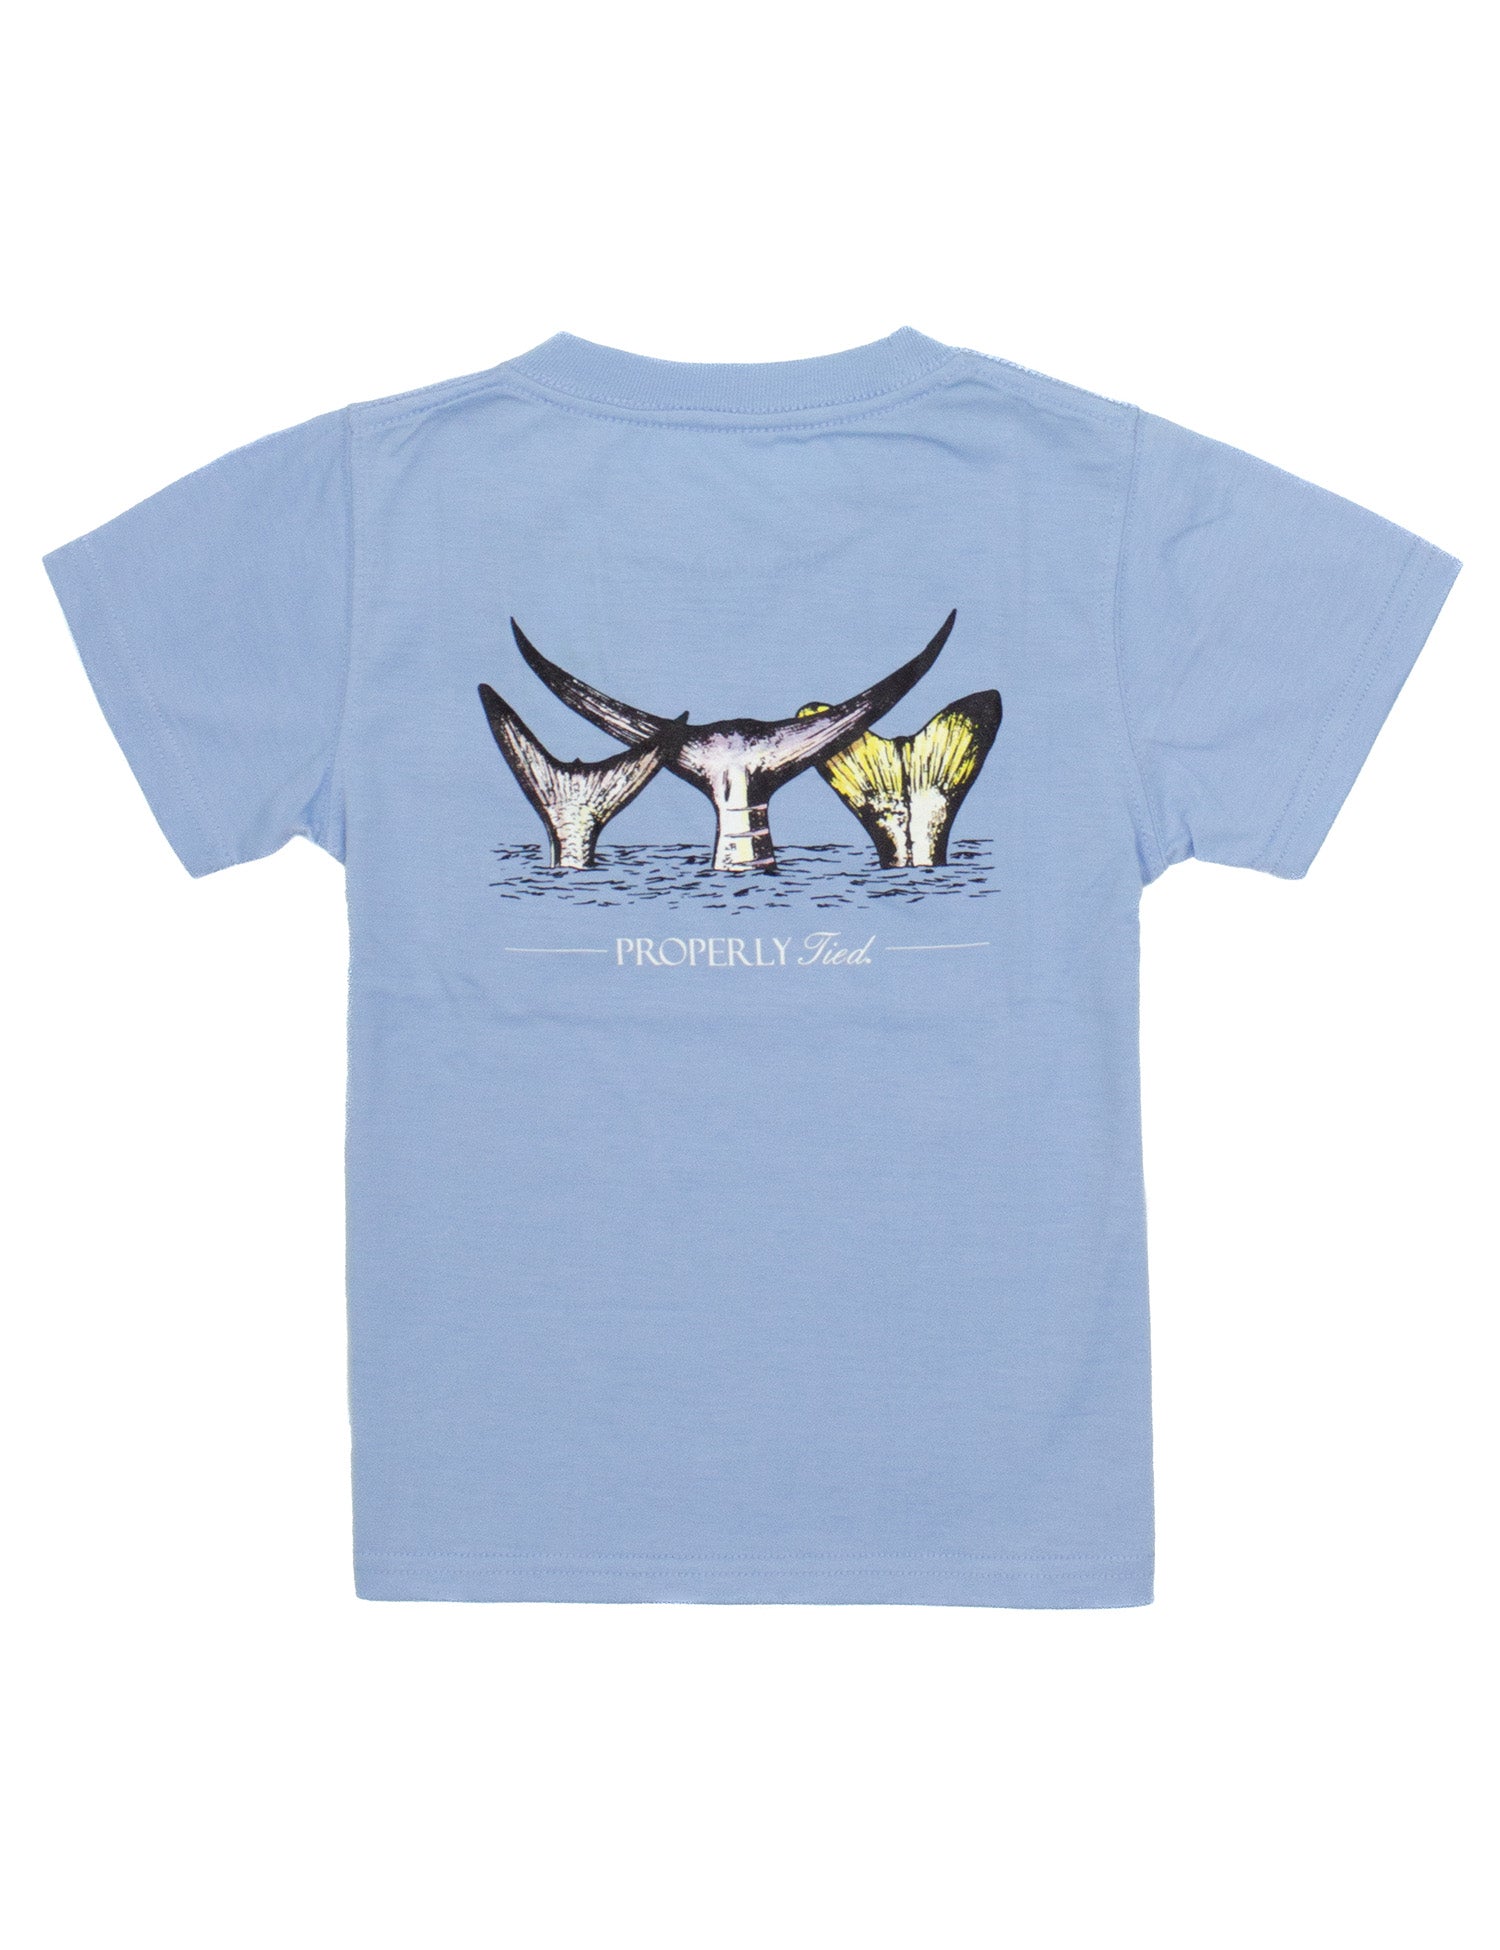 Fish Out of Water on Blue Tee